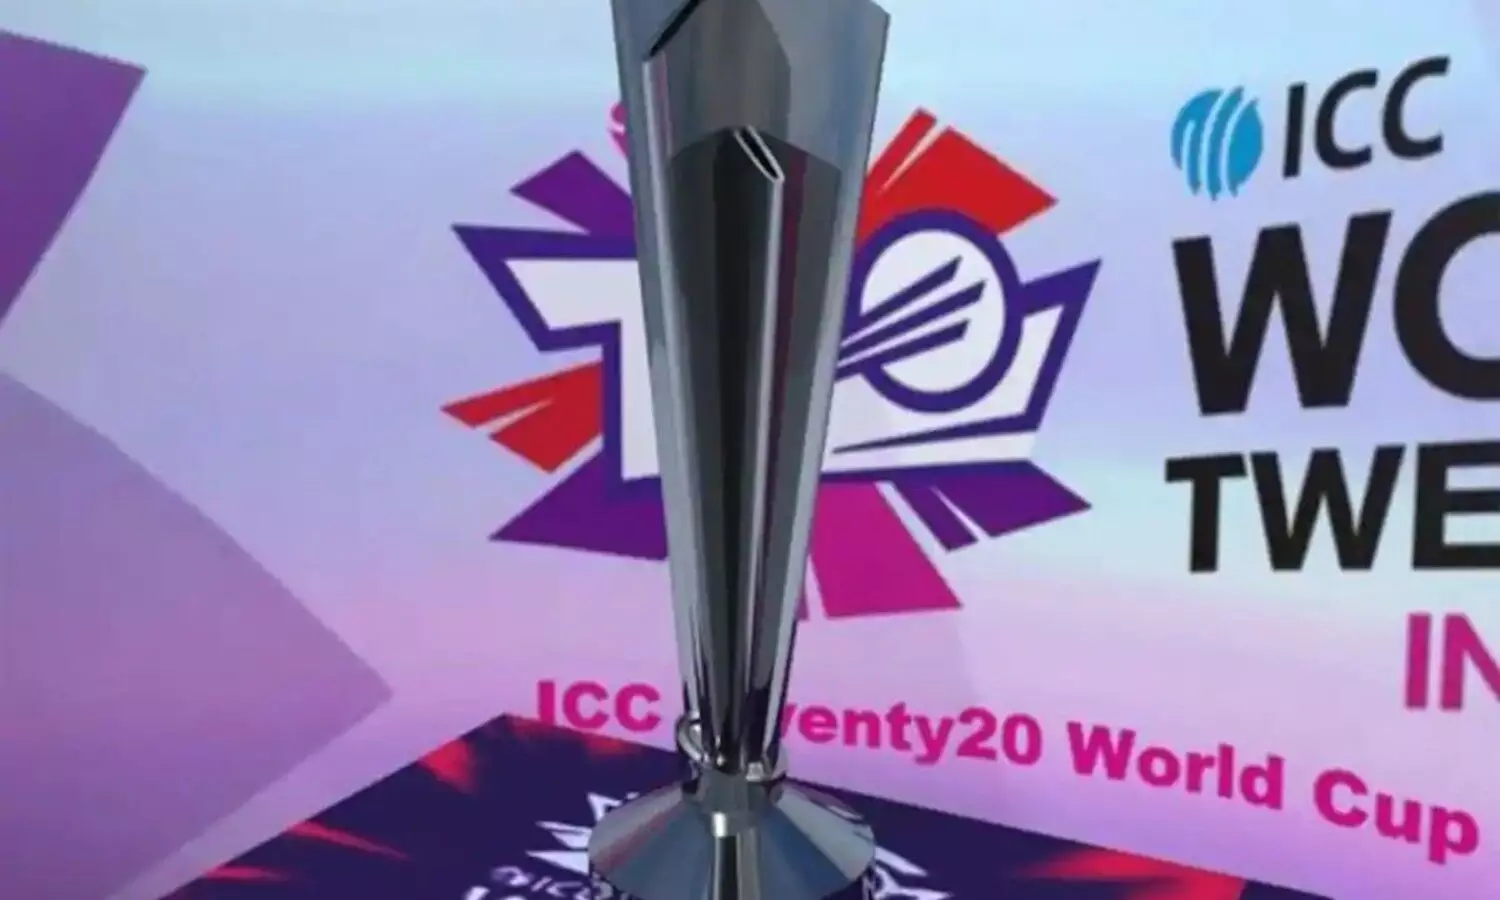 T20 World CUP 2021